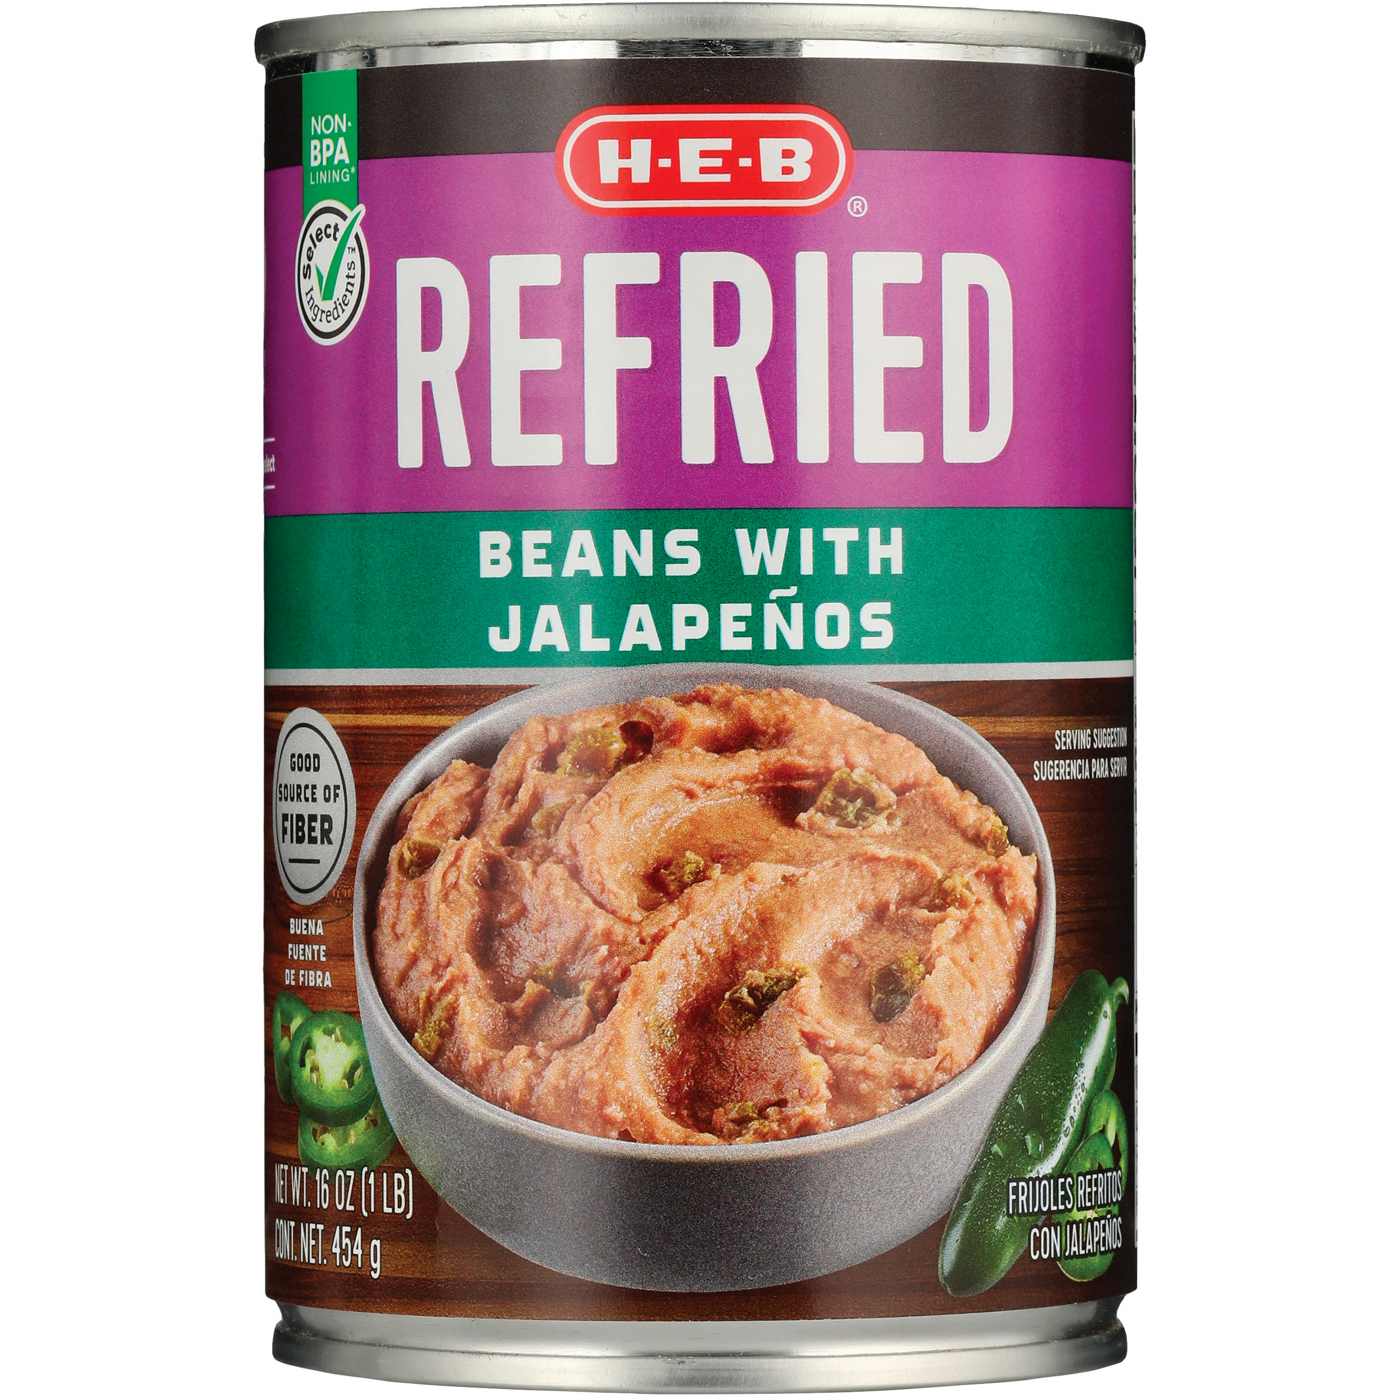 H-E-B Refried Beans with Jalapenos; image 1 of 2